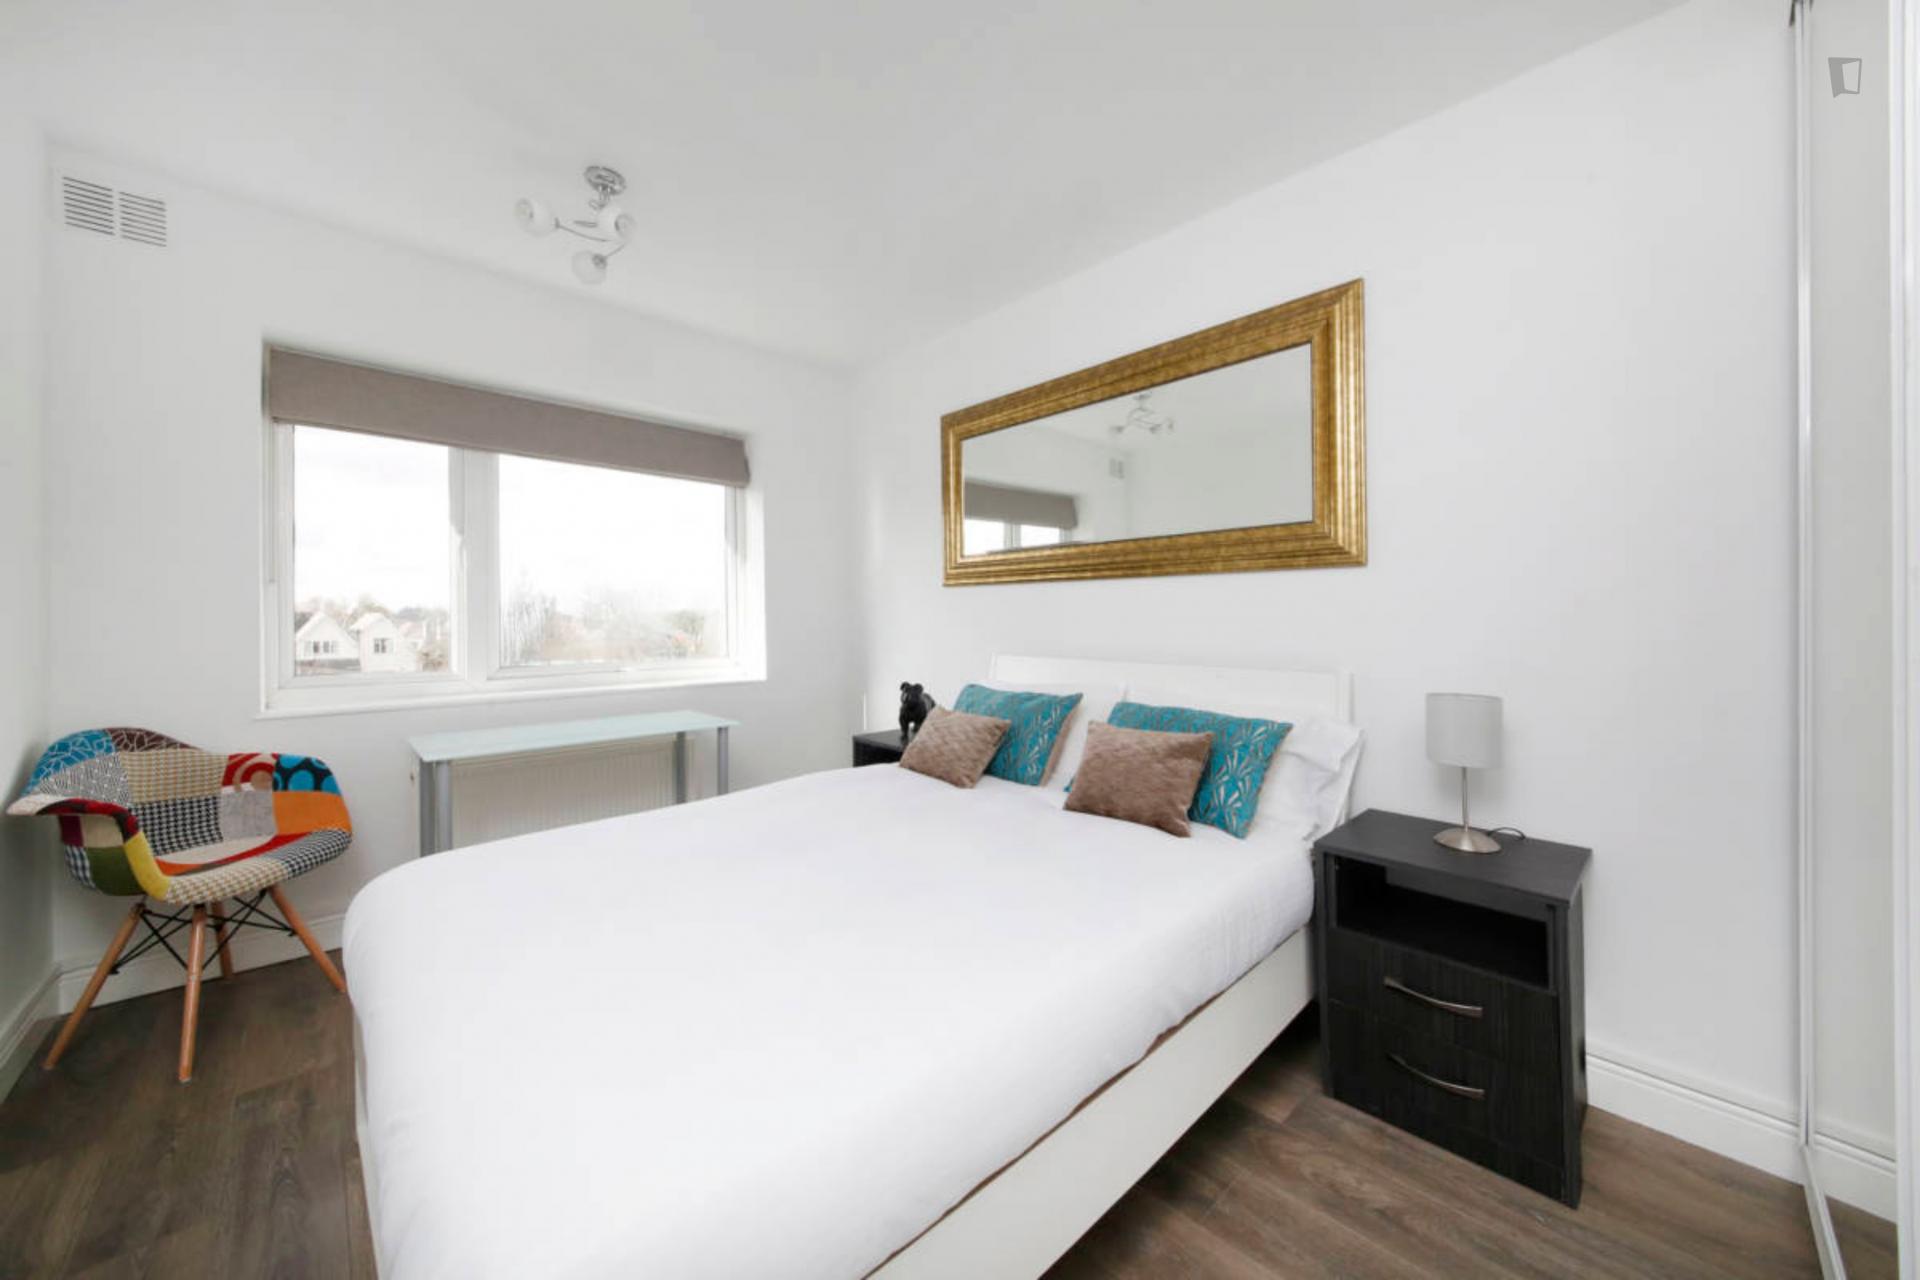 Court 2 - Shared apartment in London for expats